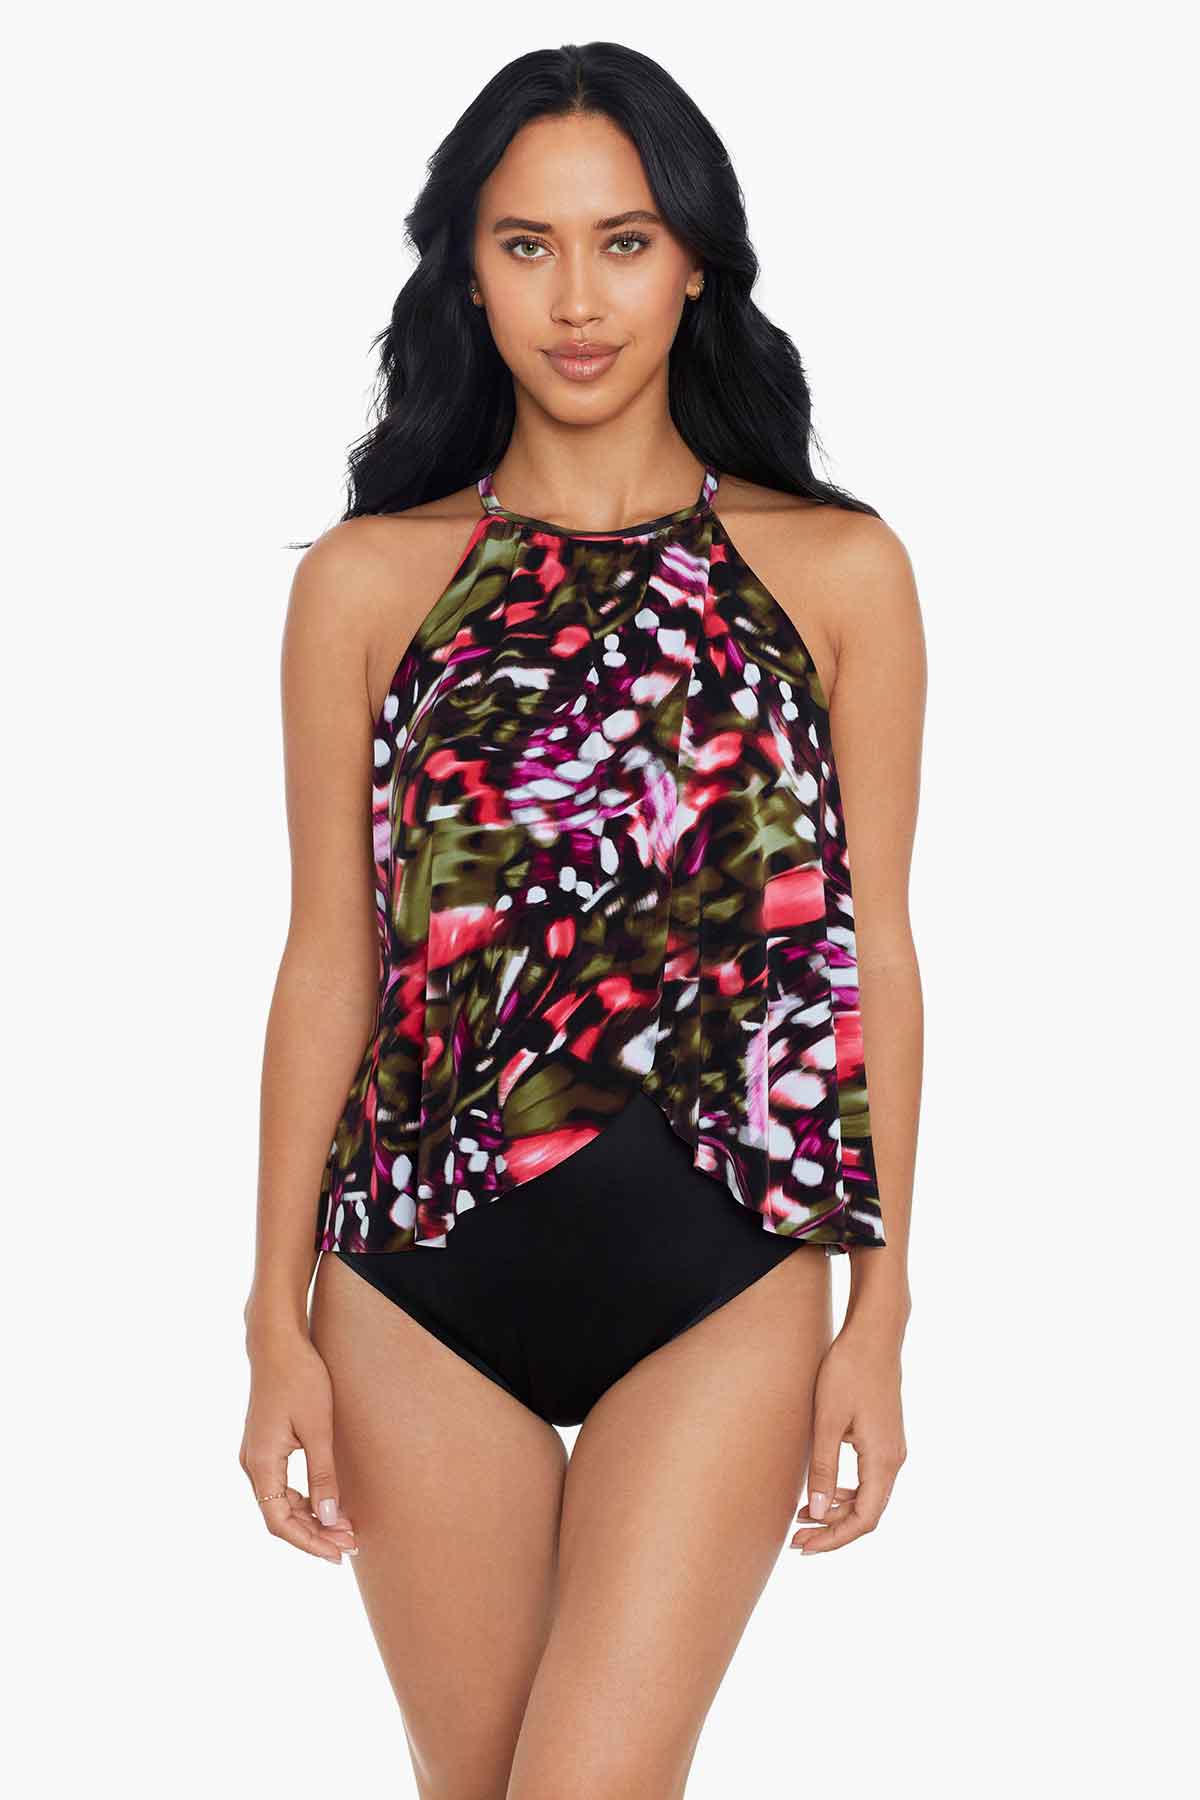 Miraclesuit 6524917 Women's Tigris Siren Brown Animal Print Swimsuit 14 :  Miraclesuit: : Clothing, Shoes & Accessories